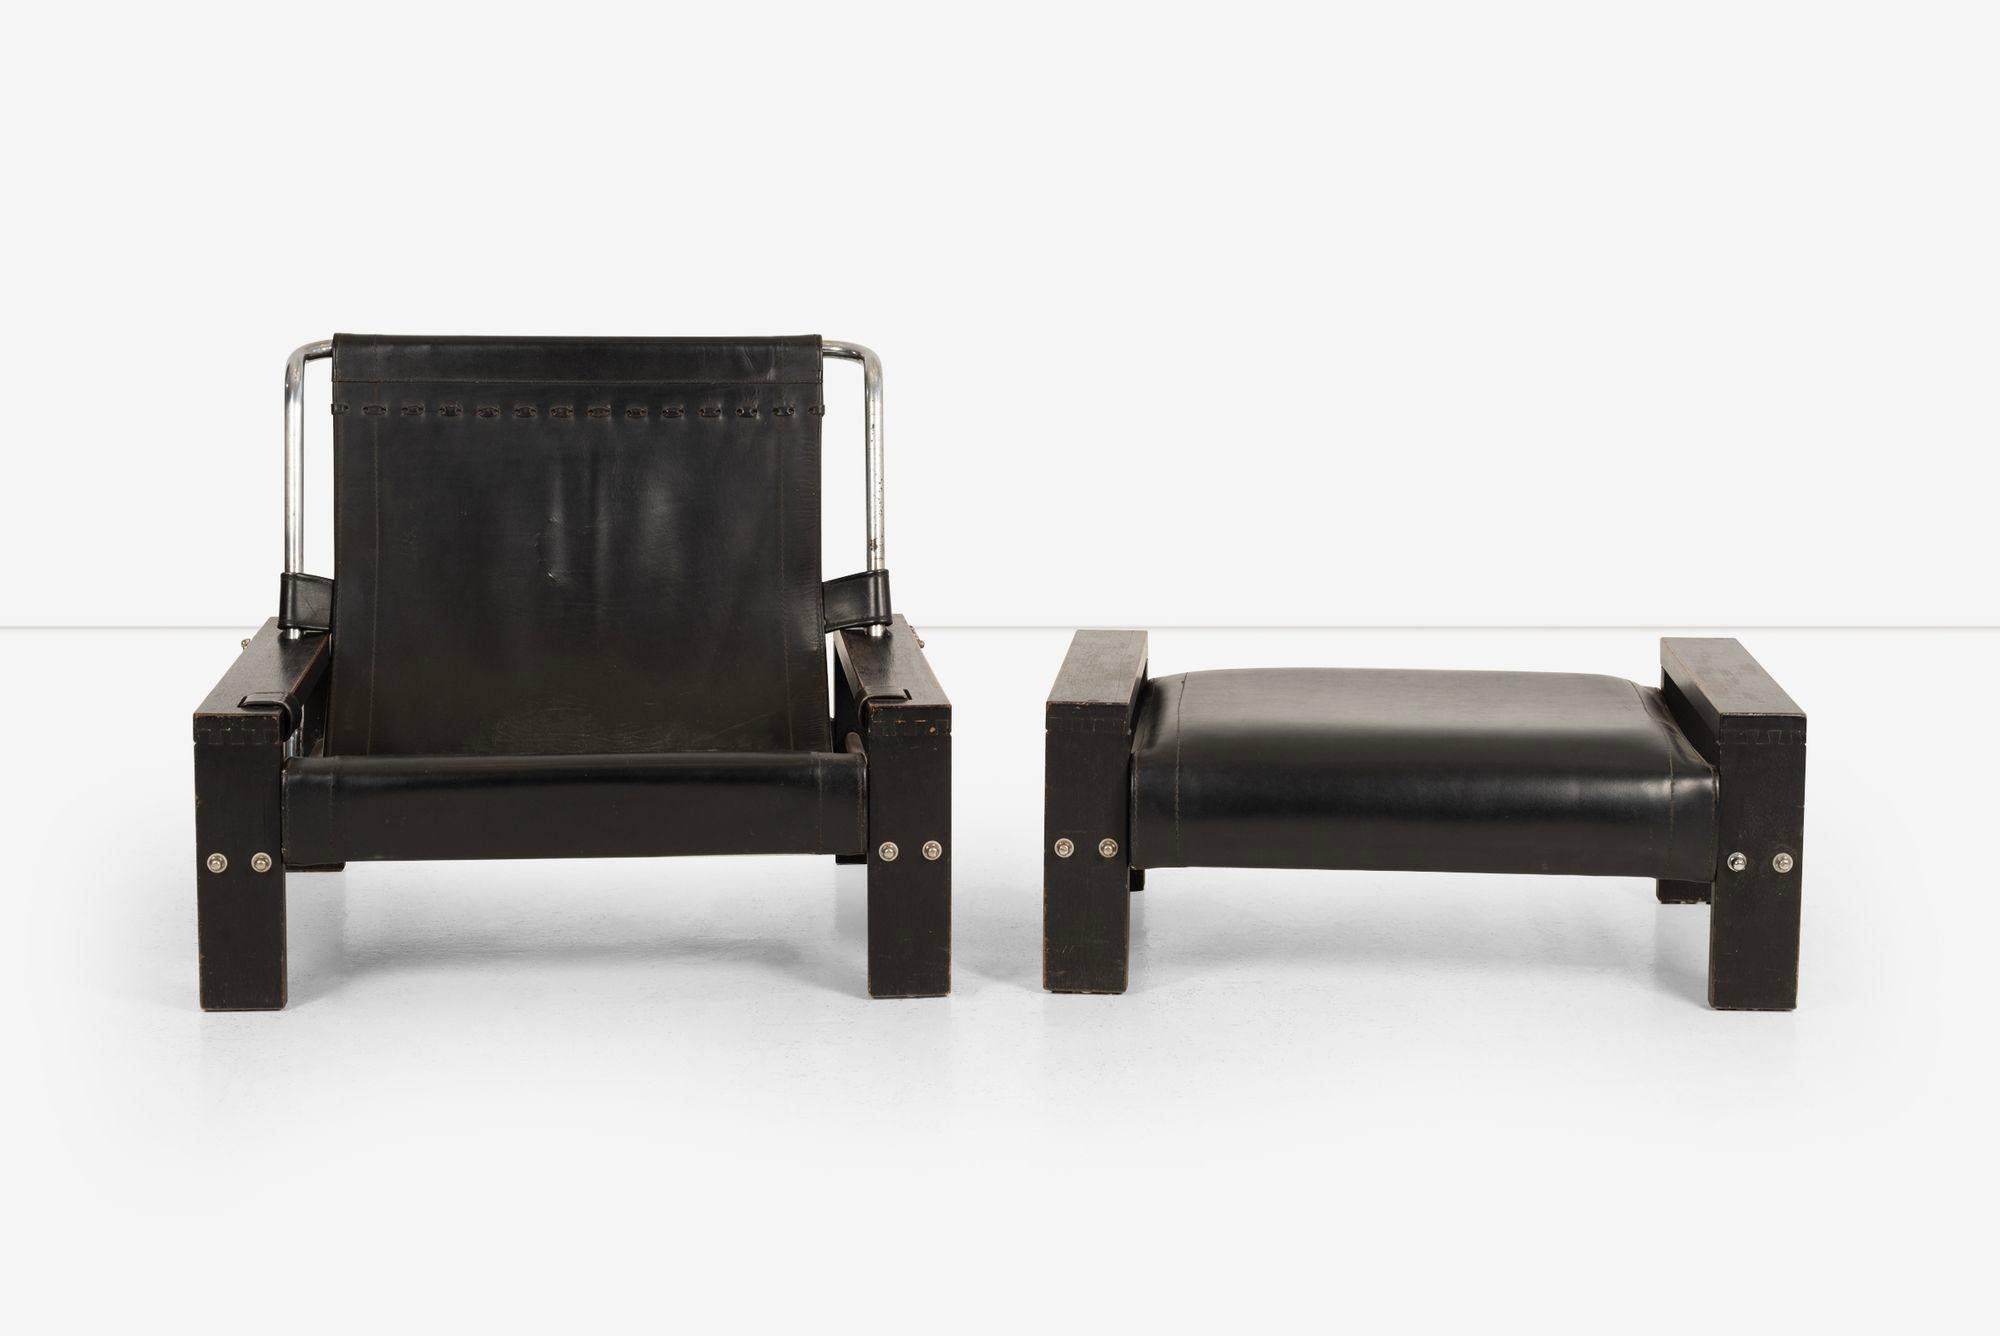 Lounge Chair and Ottoman designed by Atelier Sonja Wasseur, featuring an adjustable buckled back black leather sling lounge chair and a matching cushion ottoman. One of the distinctive features of this set is the rarity of this particular